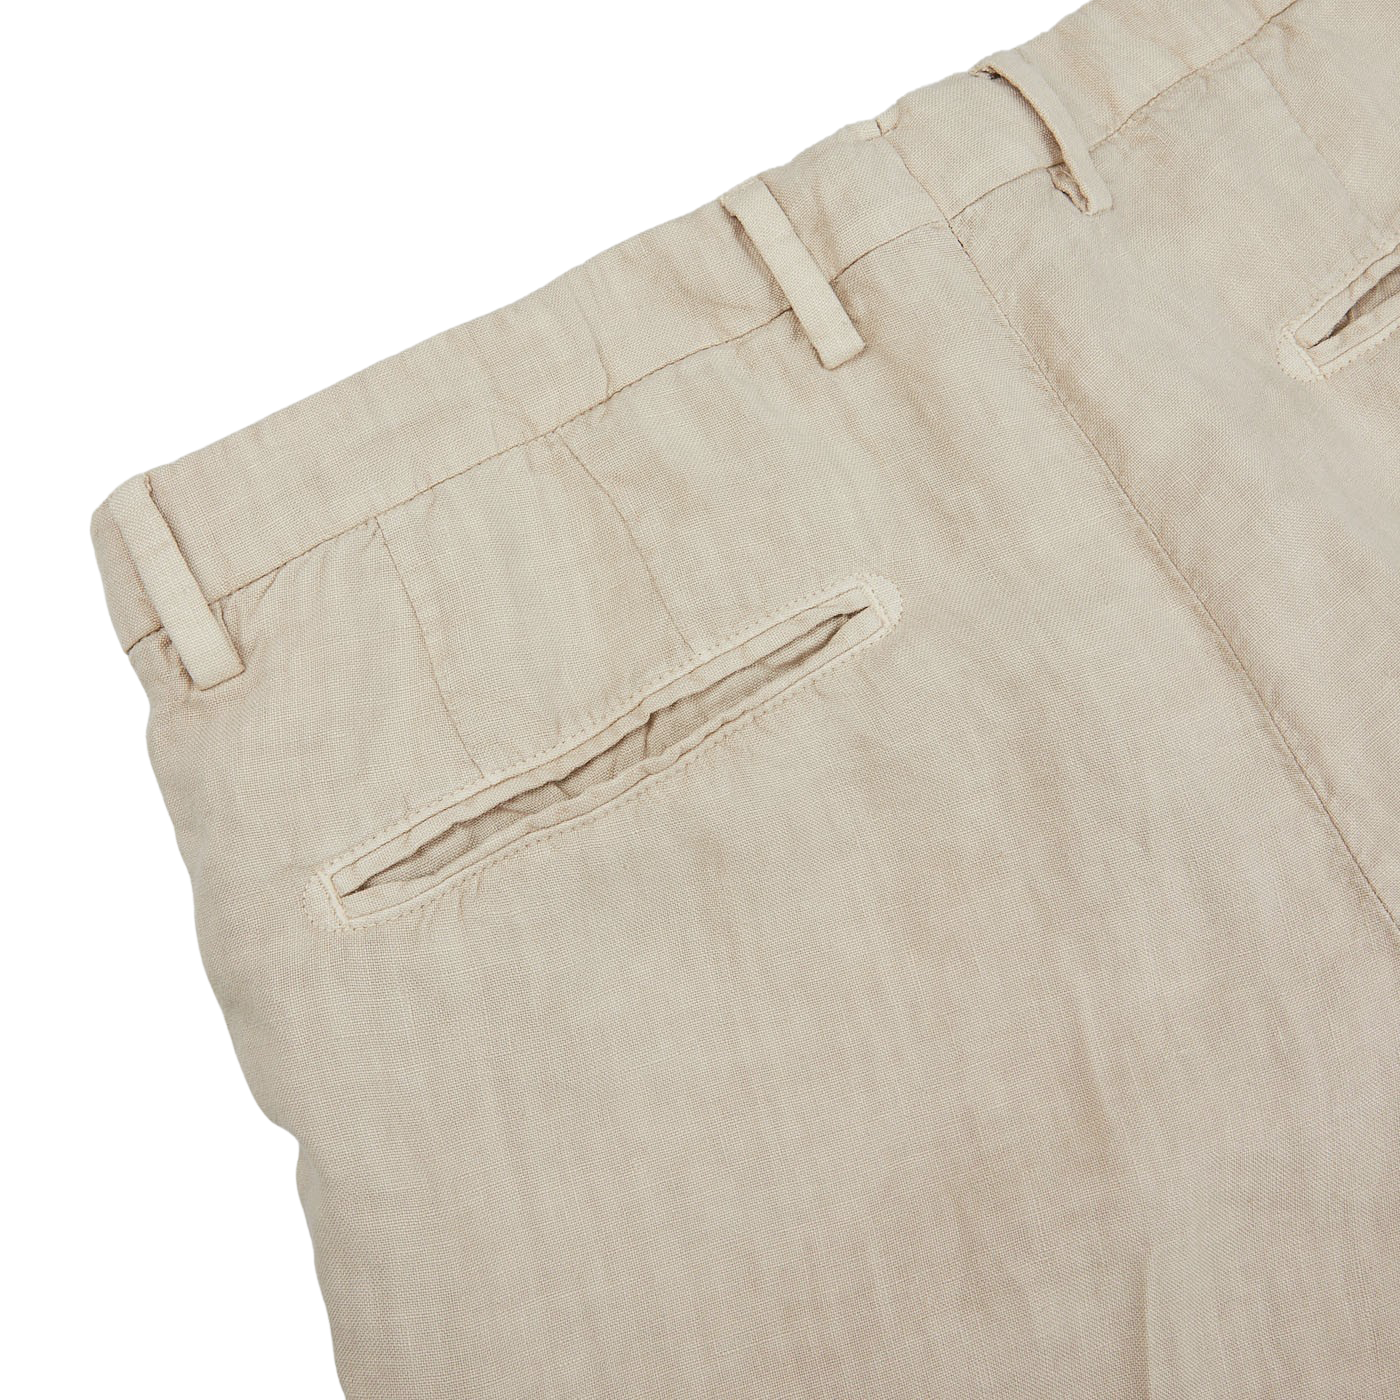 A close up of a Boglioli Sand Beige Washed Linen Unstructured Suit trouser, made with linen fabric.